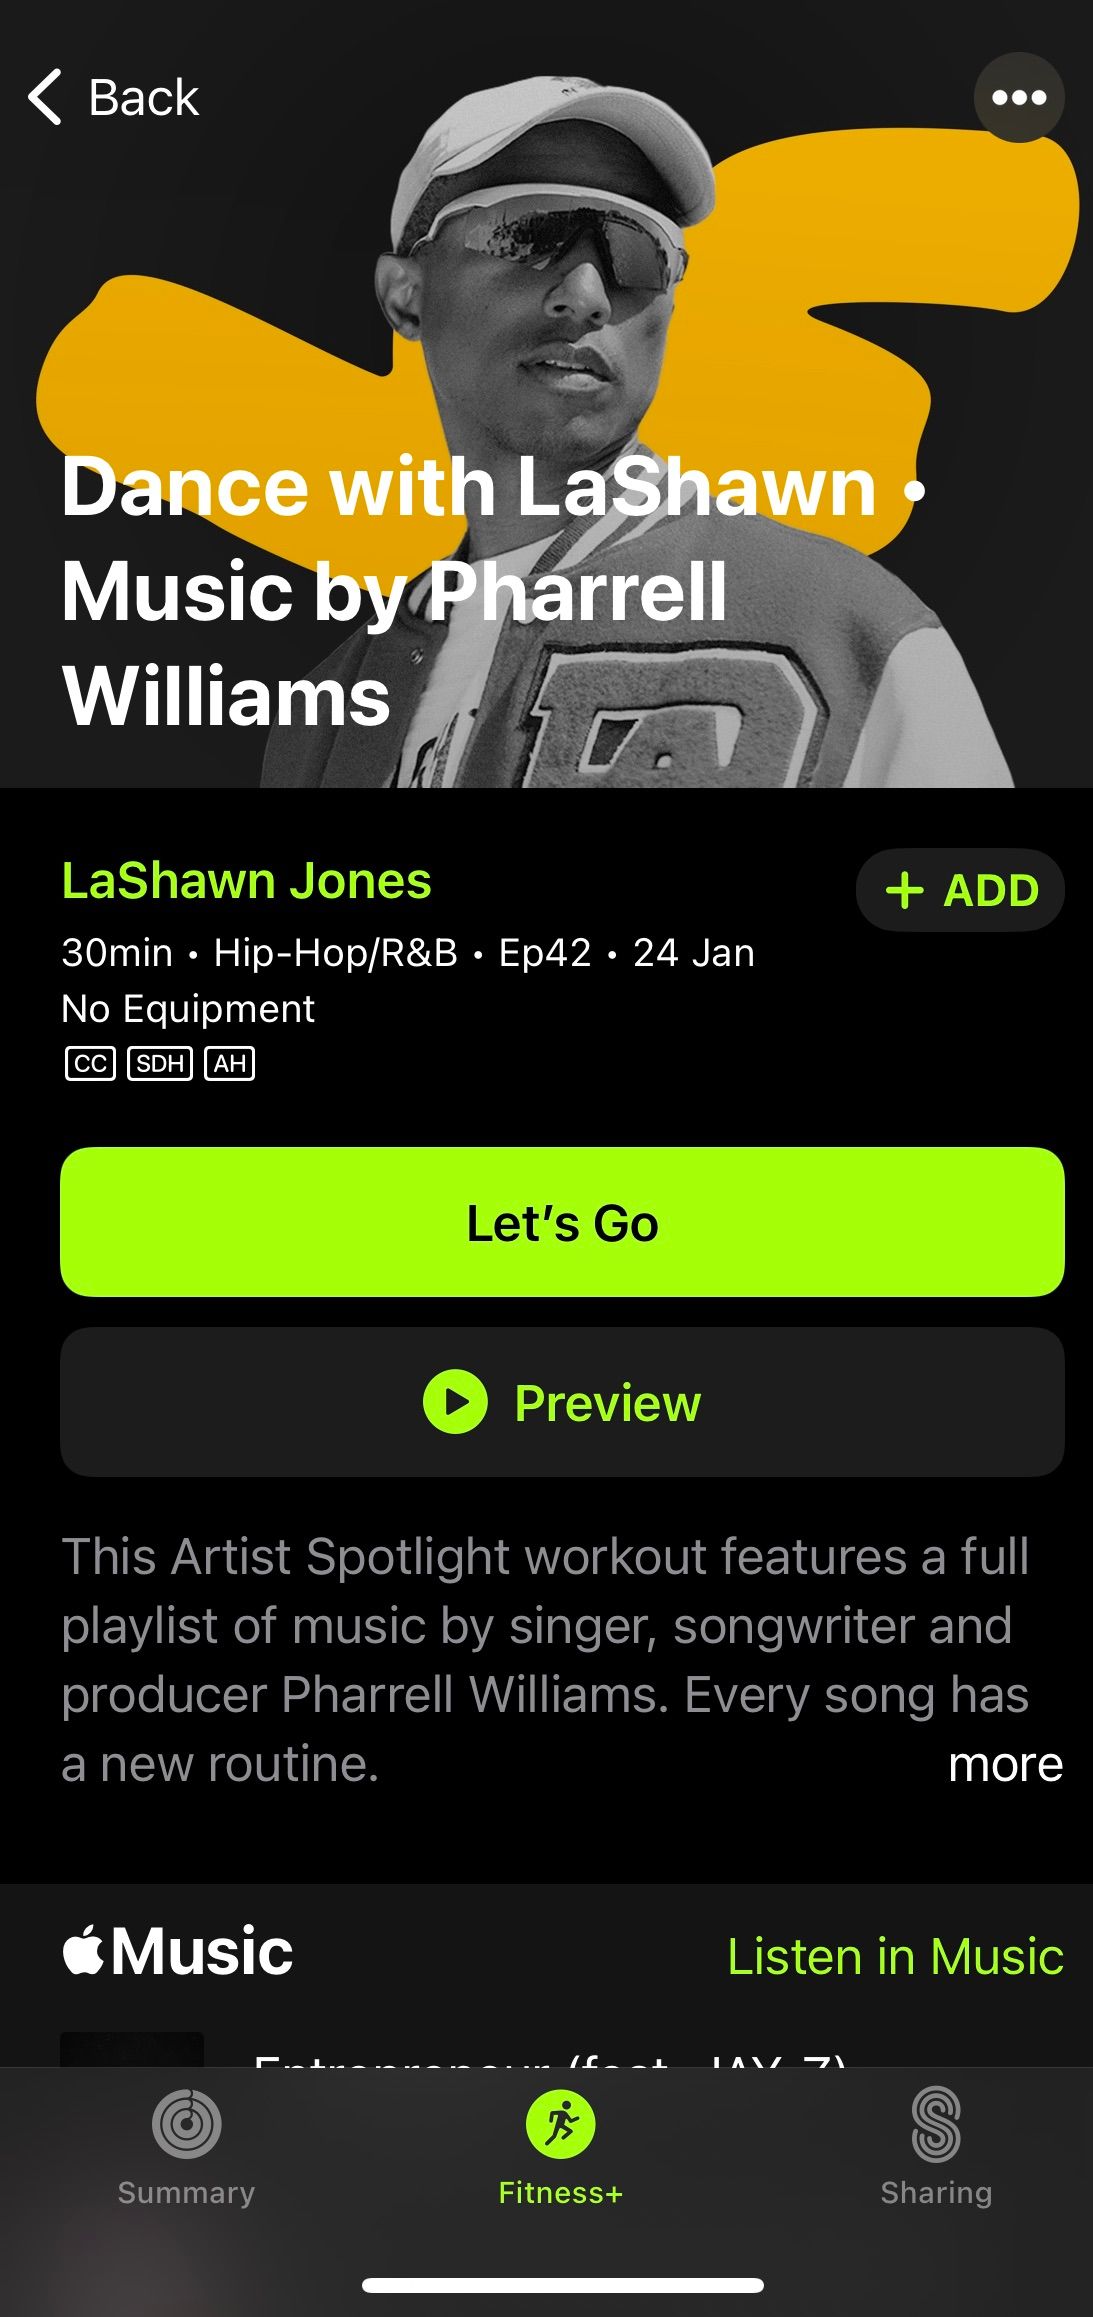 Screenshot from Apple Fitness+ app showing a dance workout with Pharrell Williams